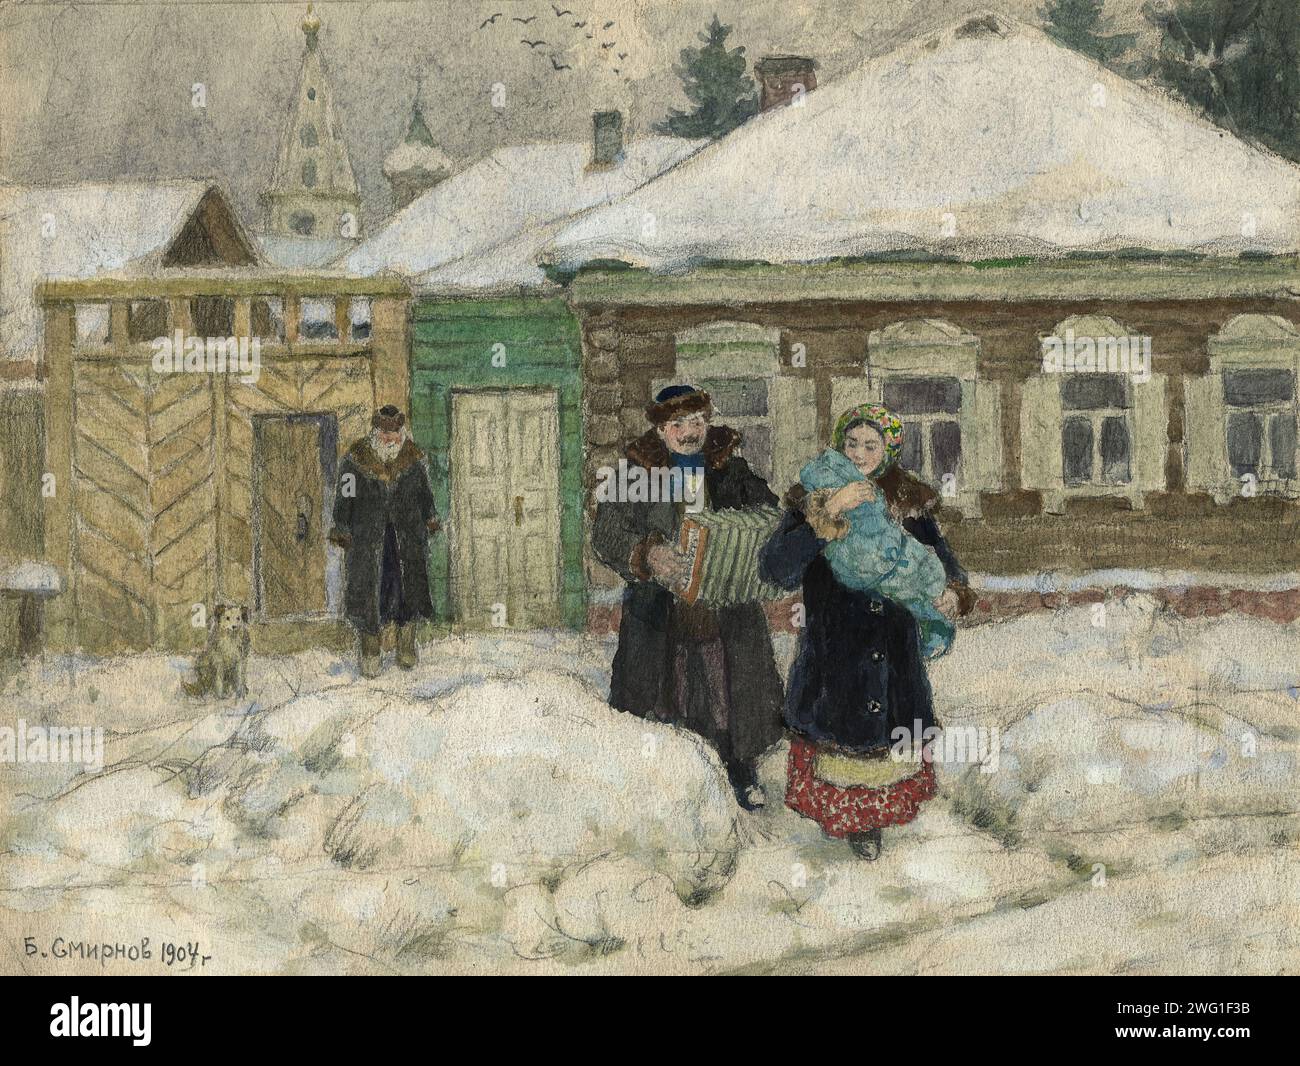 Going for a Visit. Krasnoyarsk, 1904. Boris Vasilievich Smirnov (1881-1954) was a Russian artist who in 1904 traveled by prisoner transport from western Russia across Siberia. Along the way he created a series of drawings and watercolors of the people and places he encountered. Novosibirsk State Museum of Regional History and Folklife Stock Photo